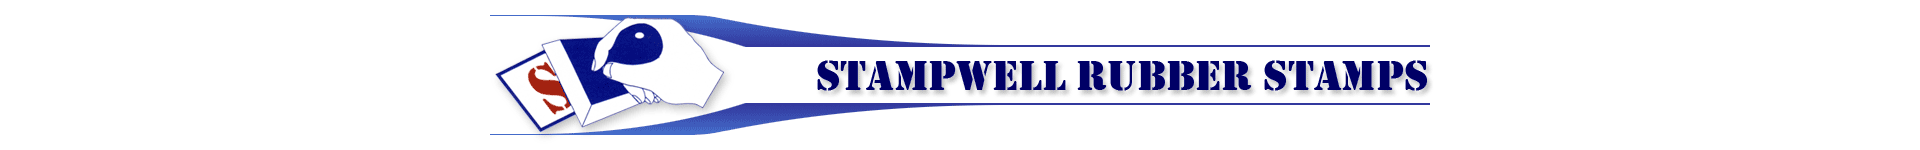 Stampwell Rubber Stamps Logo